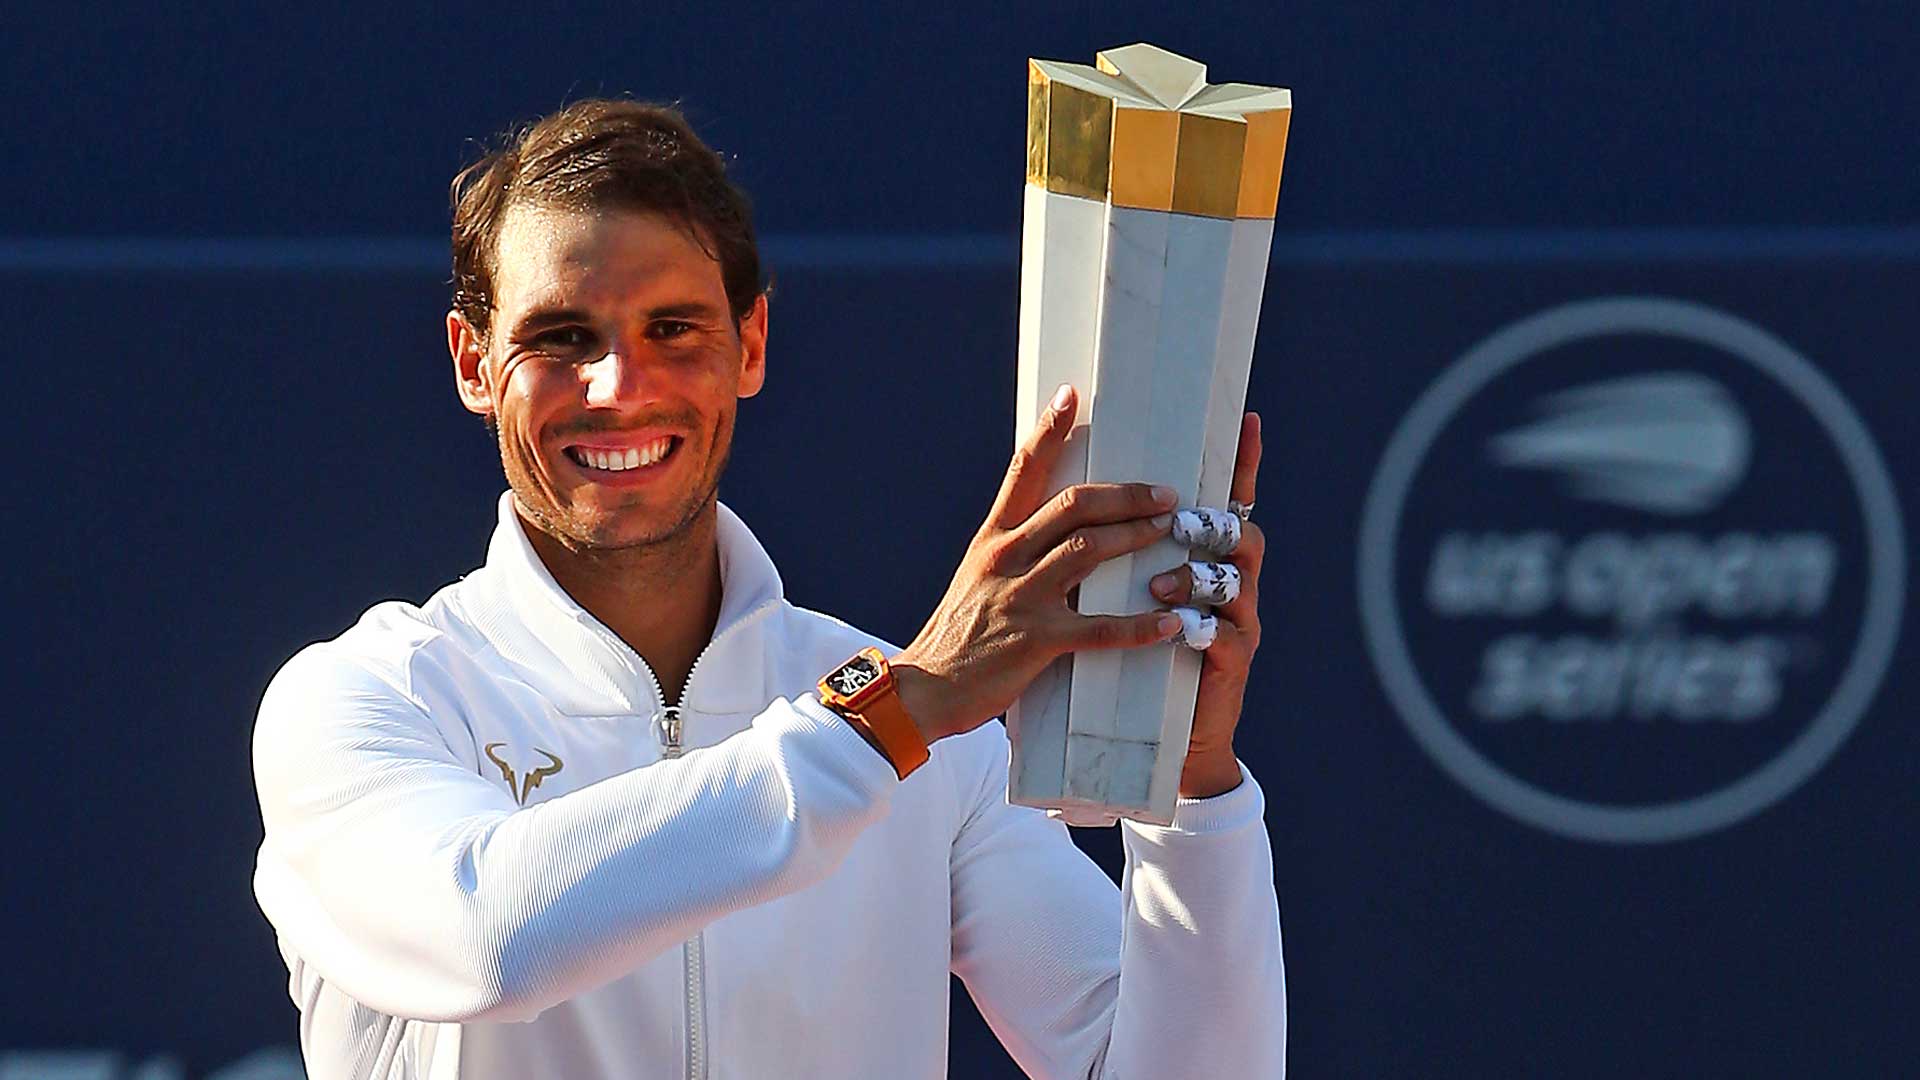 Rafael Nadal claims a fourth Rogers Cup title and a record 33rd ATP World Tour Masters 1000 crown.